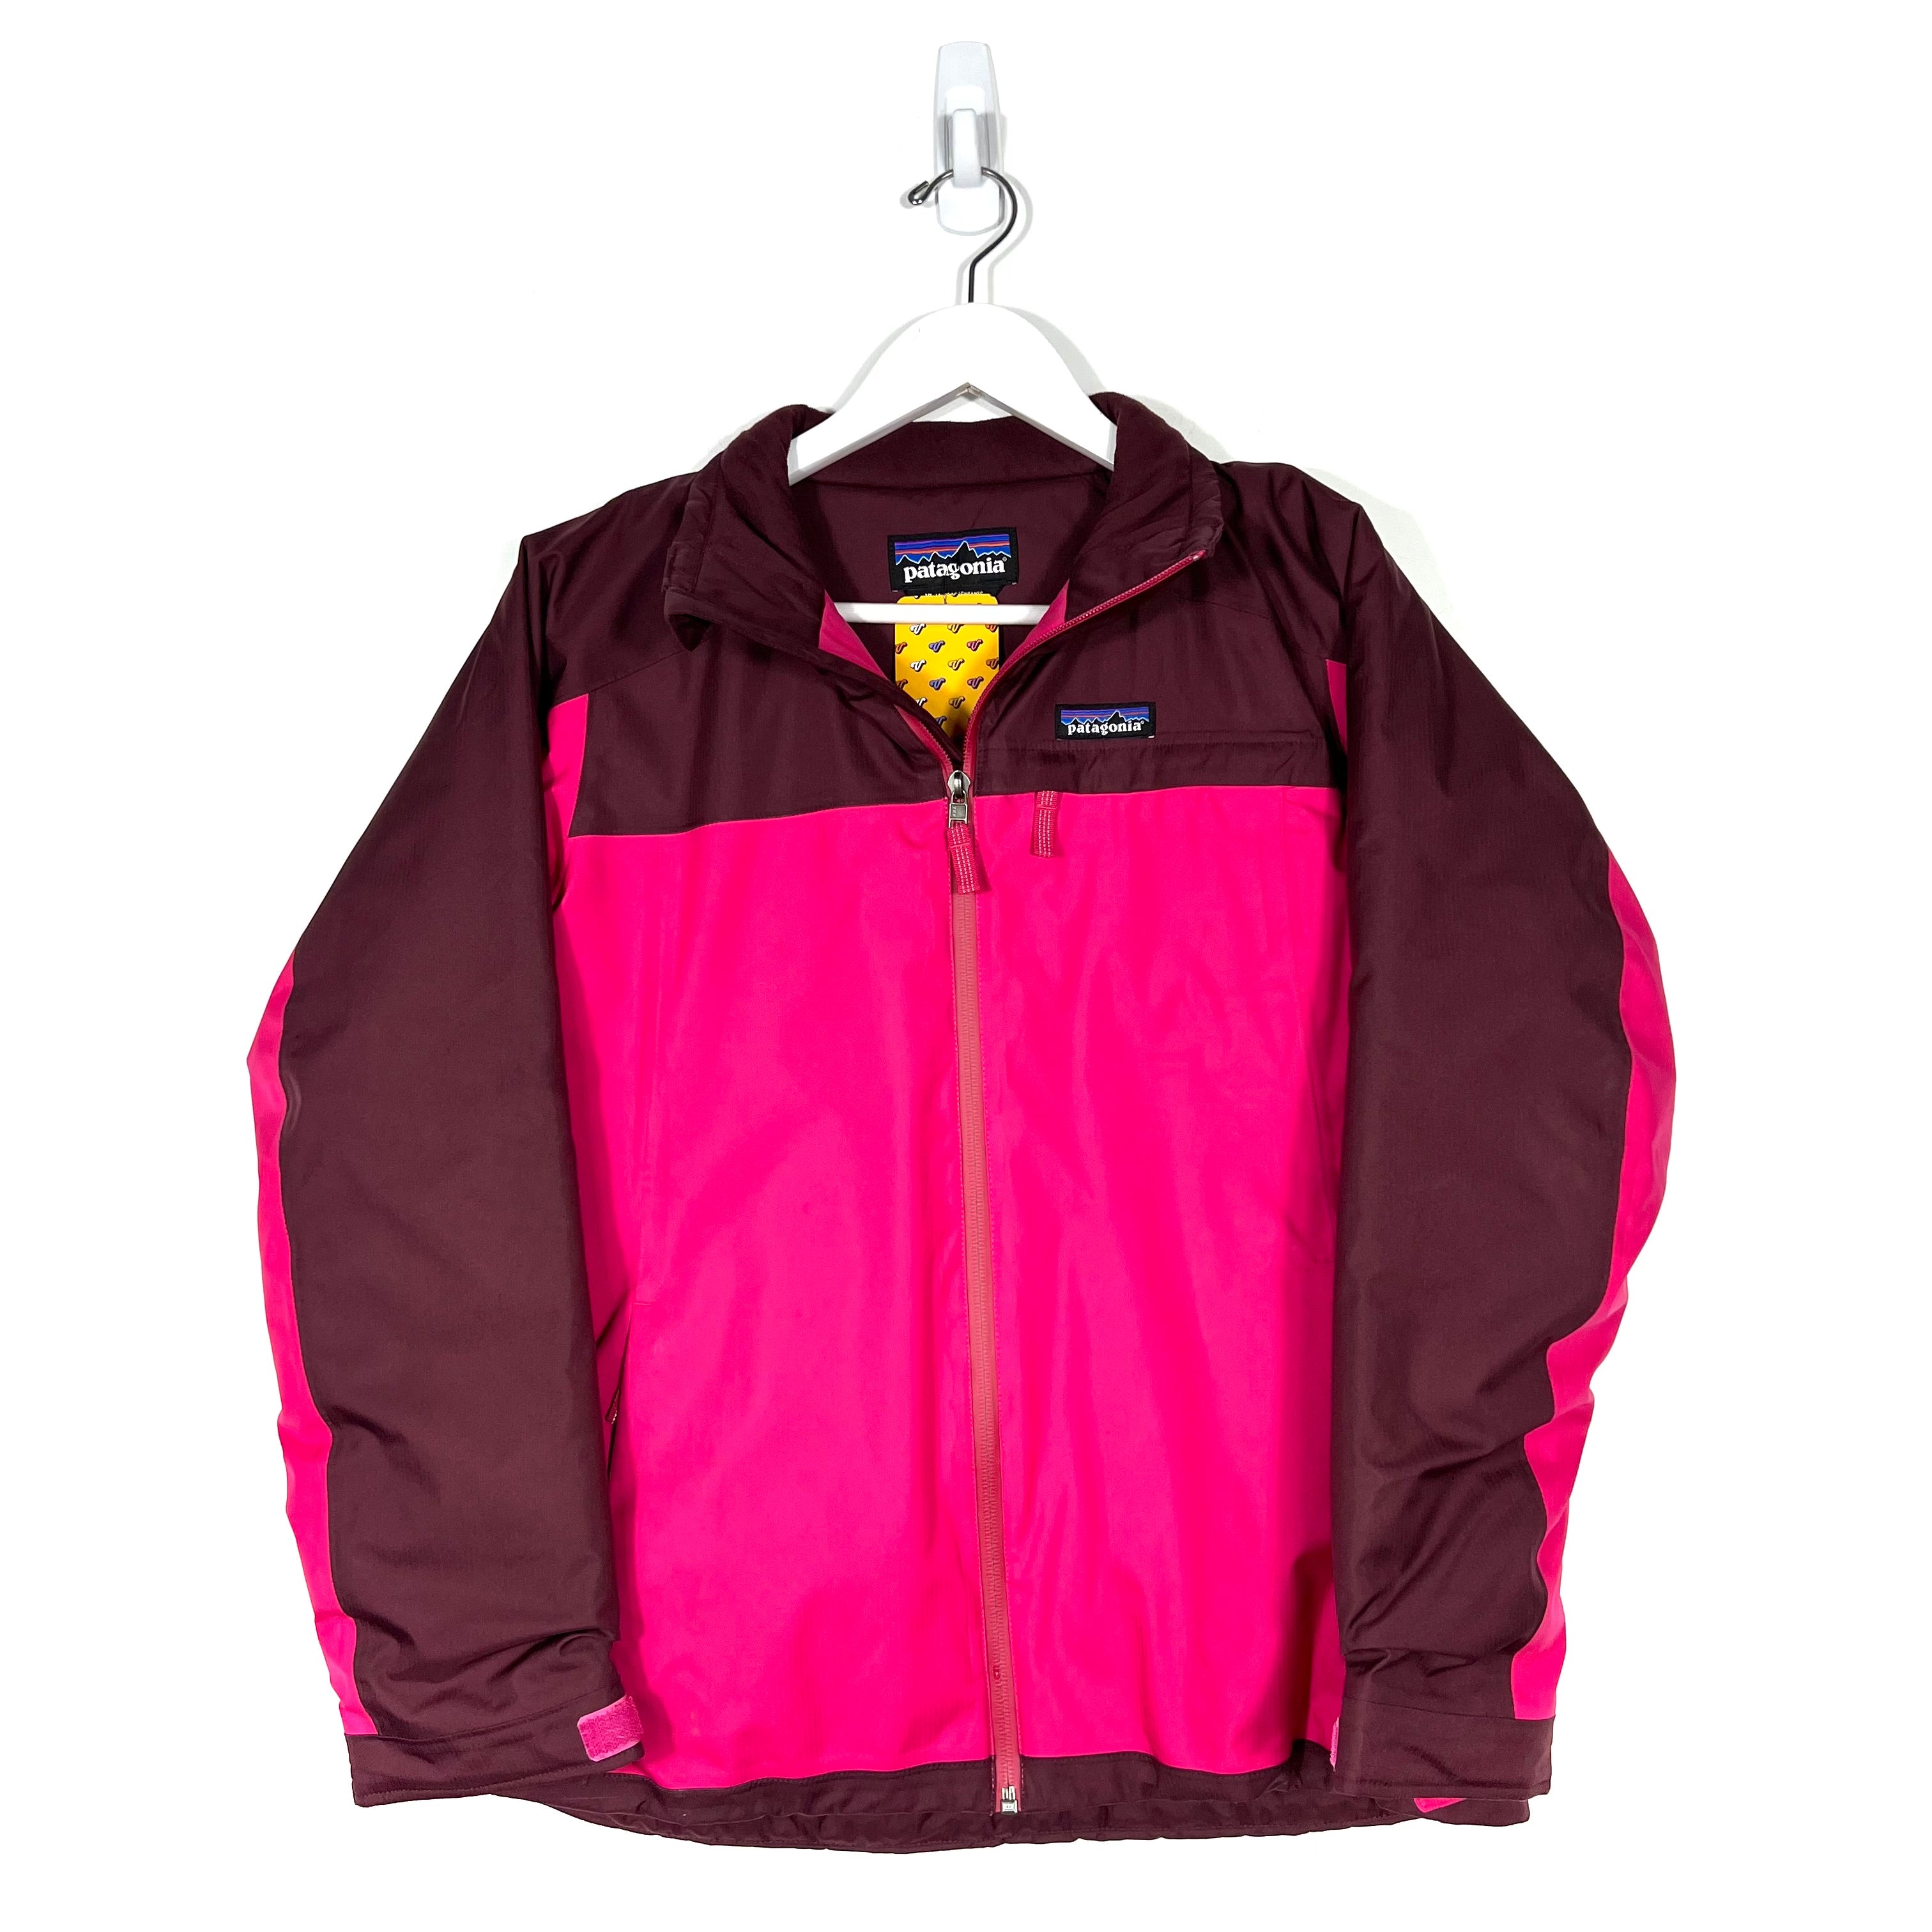 Vintage Patagonia Insulated Jacket - Women's Small